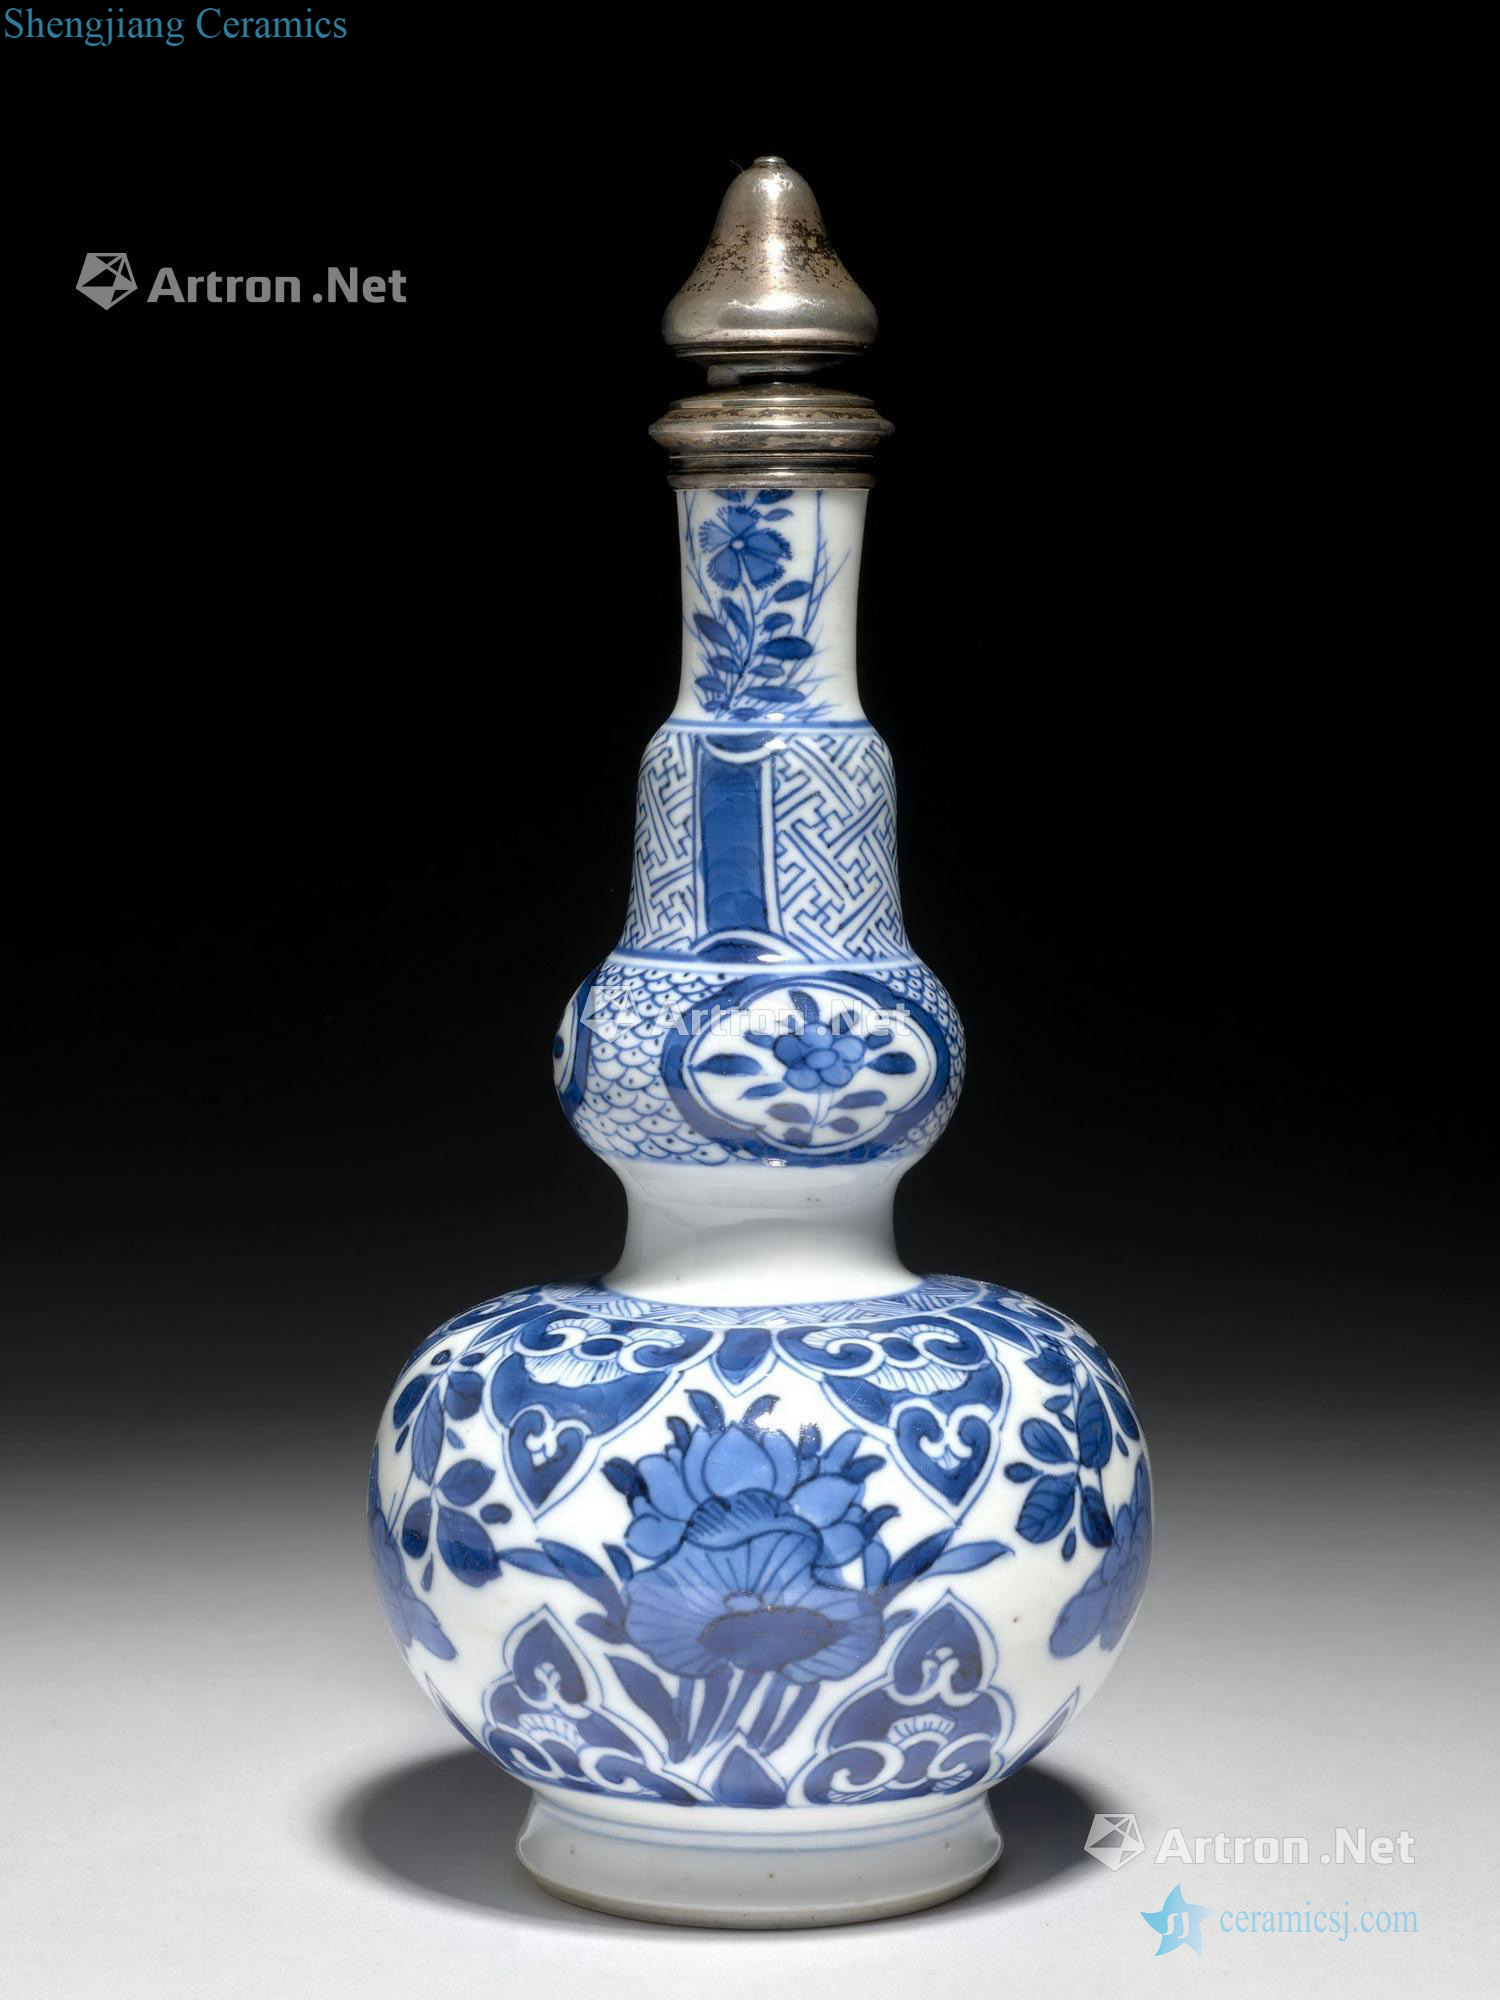 China, the Qing dynasty, Kangxi period (1662-1722), A blue and white porcelain vase with silver mount for the Ottoman market